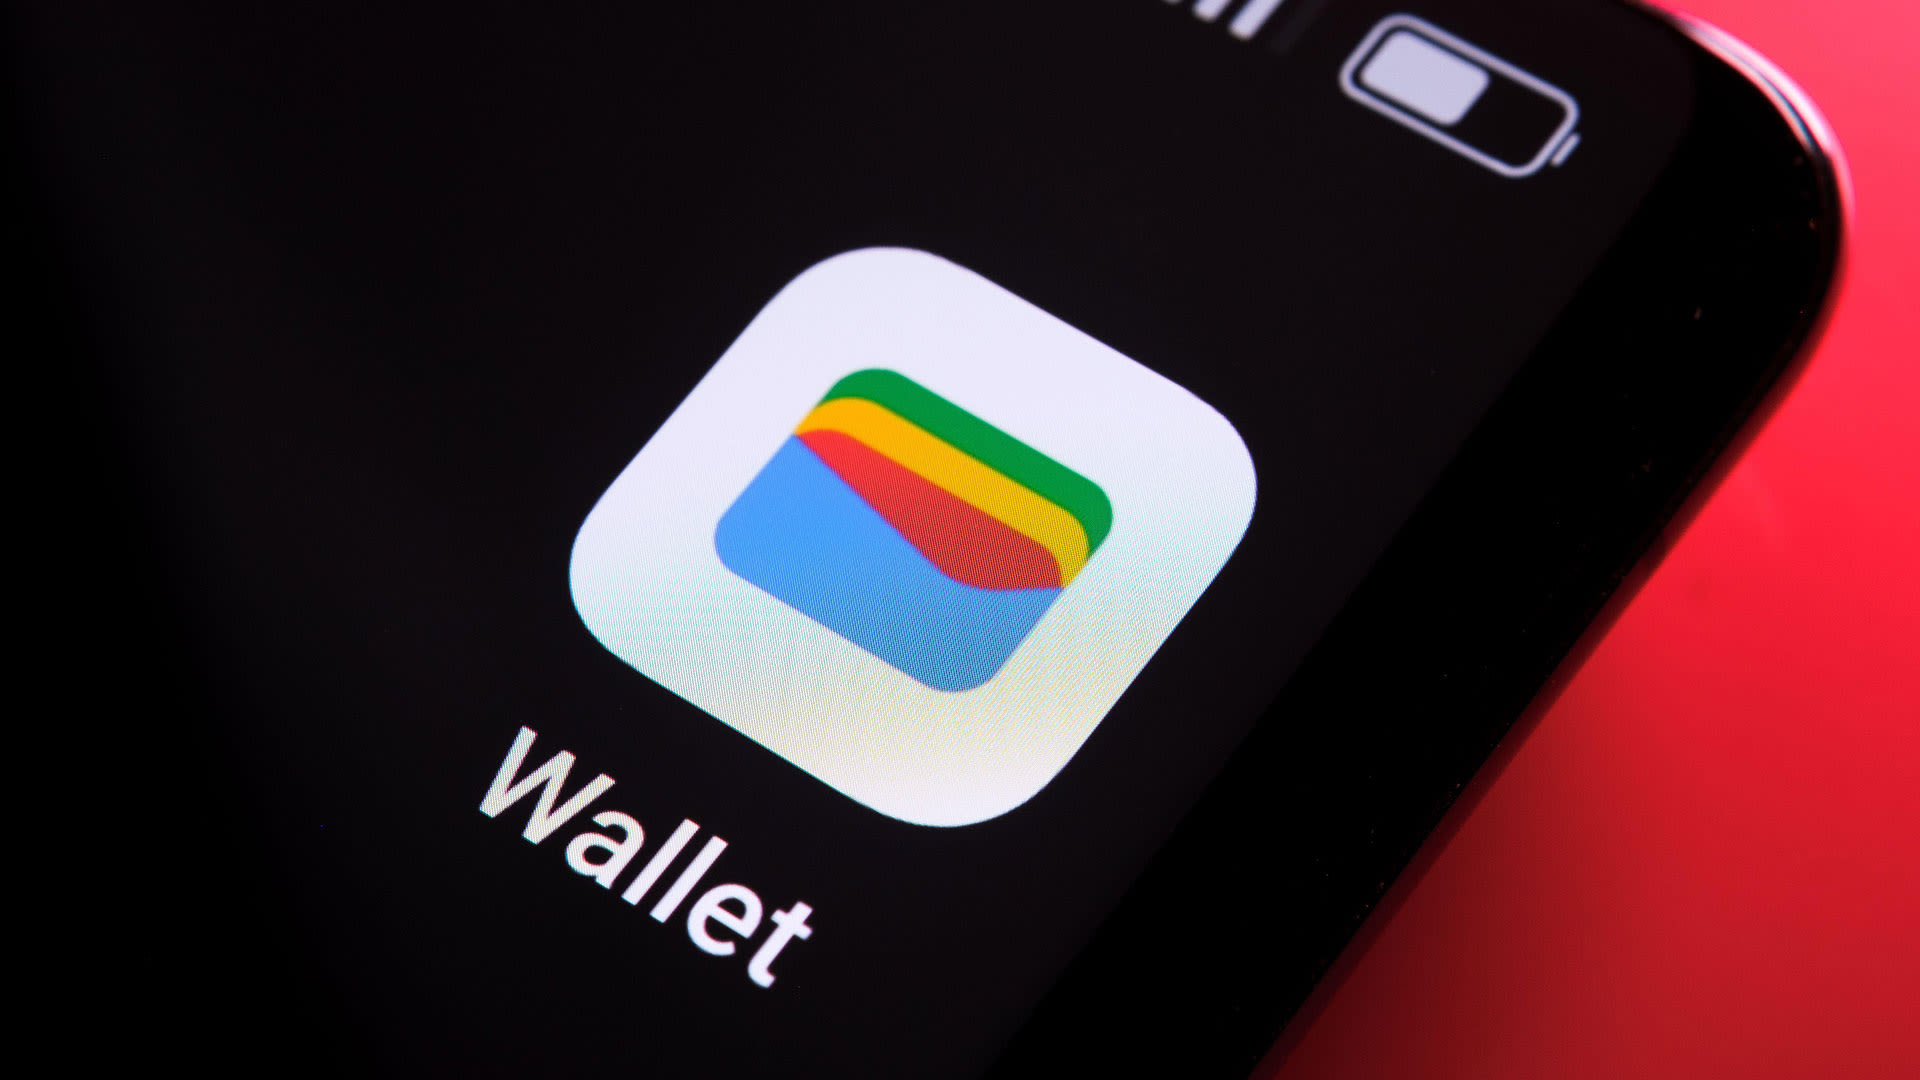 Android owners warned Google Wallet will stop working on some models next month